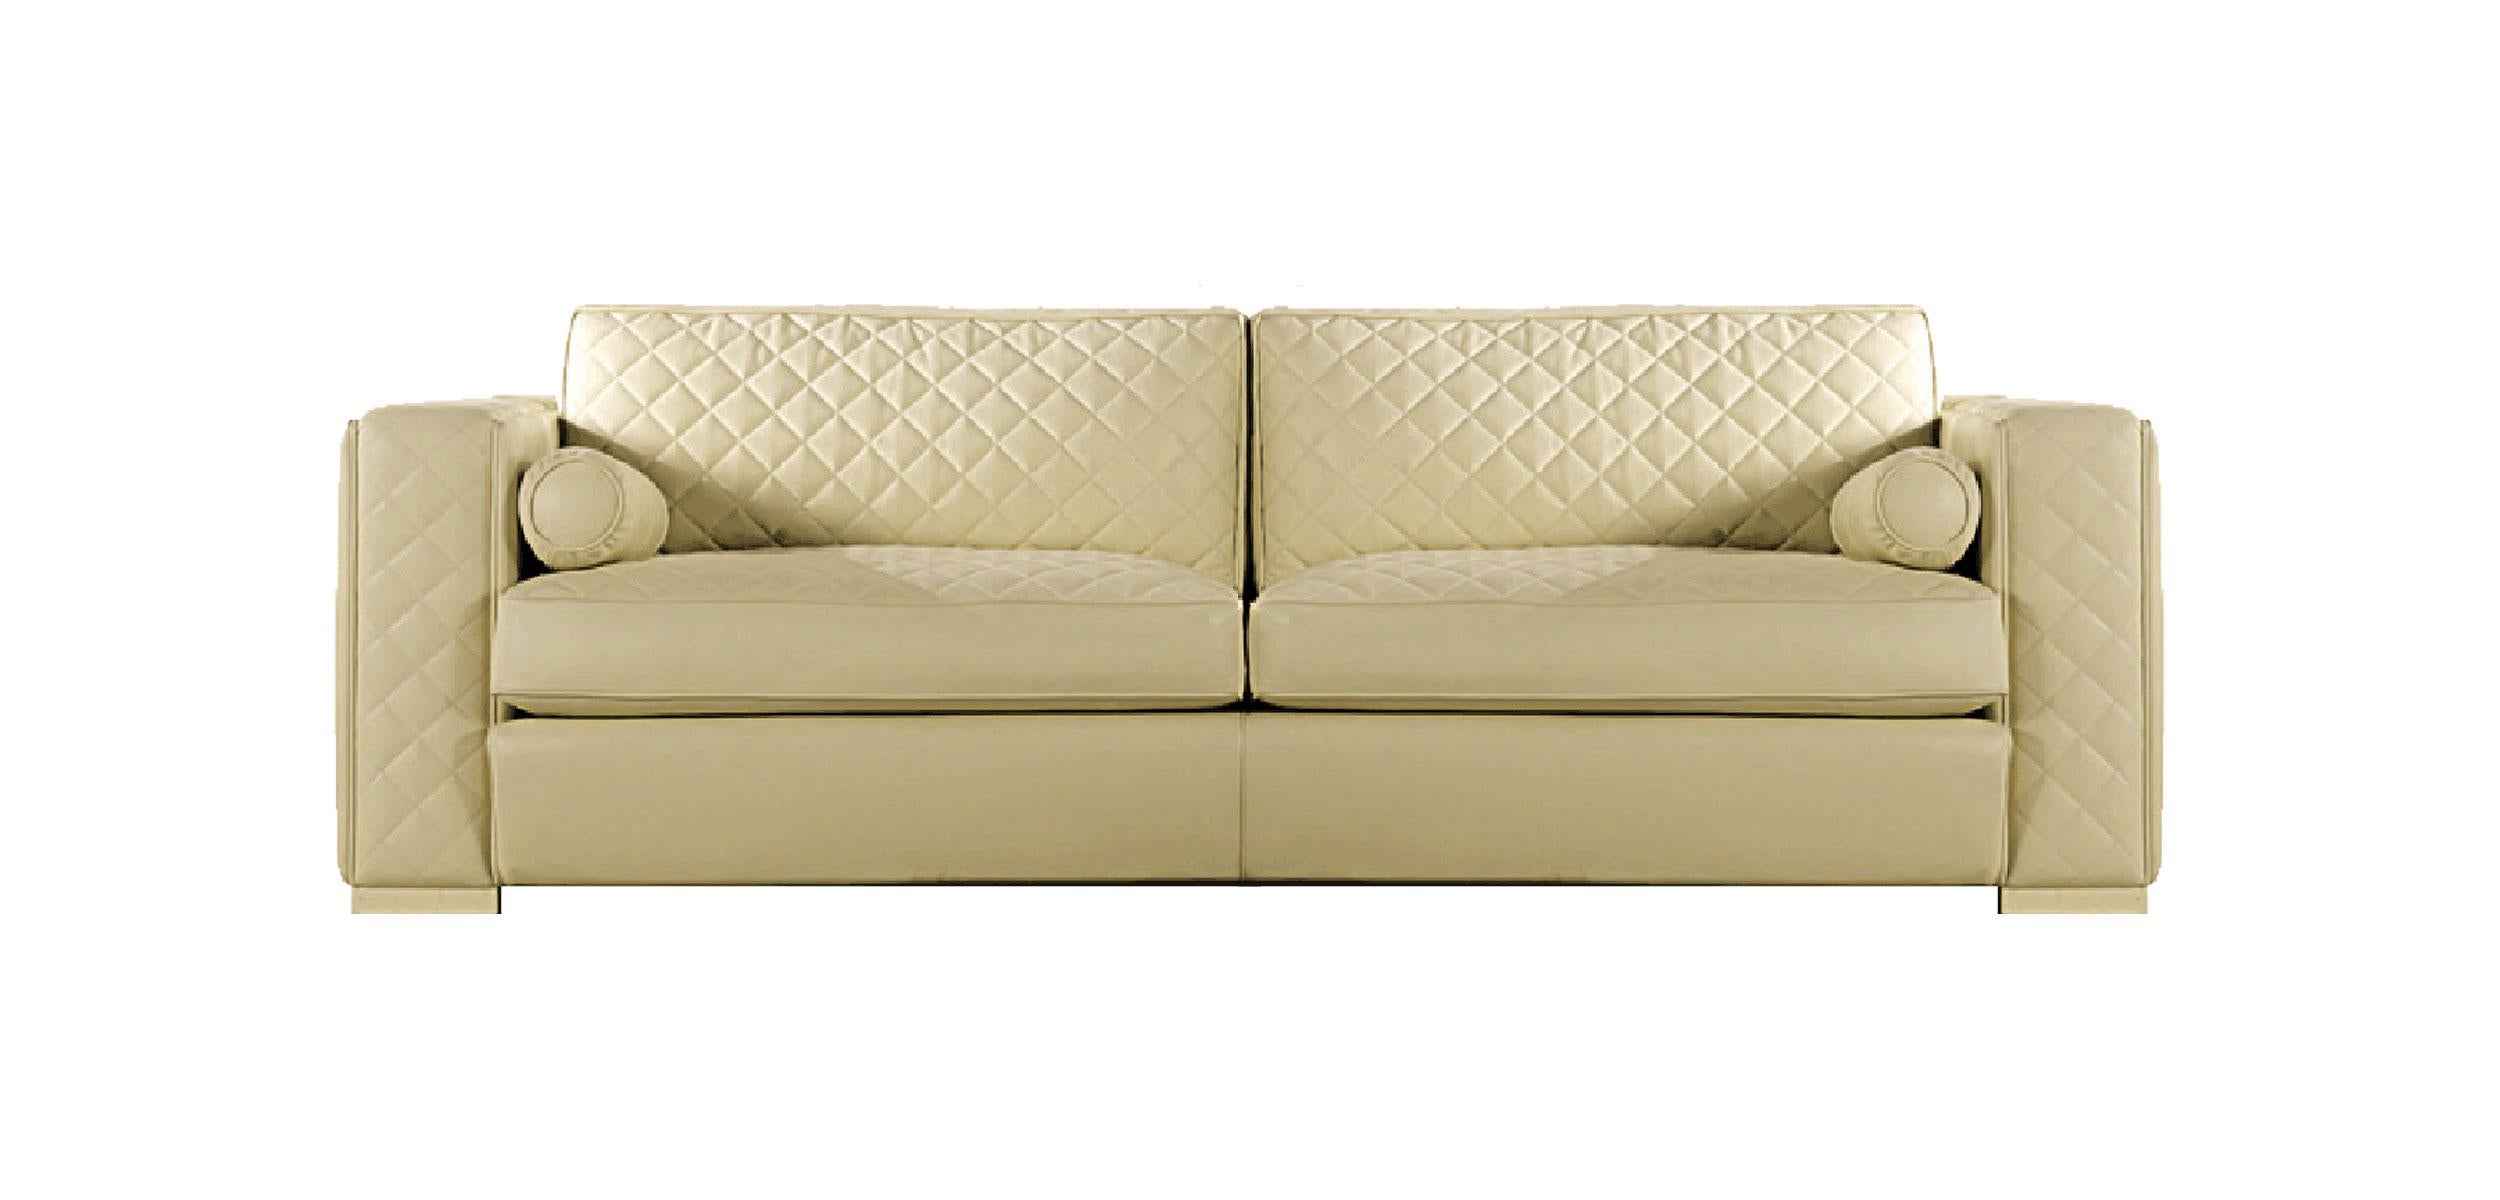 Mediterraneo Three-Seat Sofa in Leather with Embroidered Cushions by Zanaboni